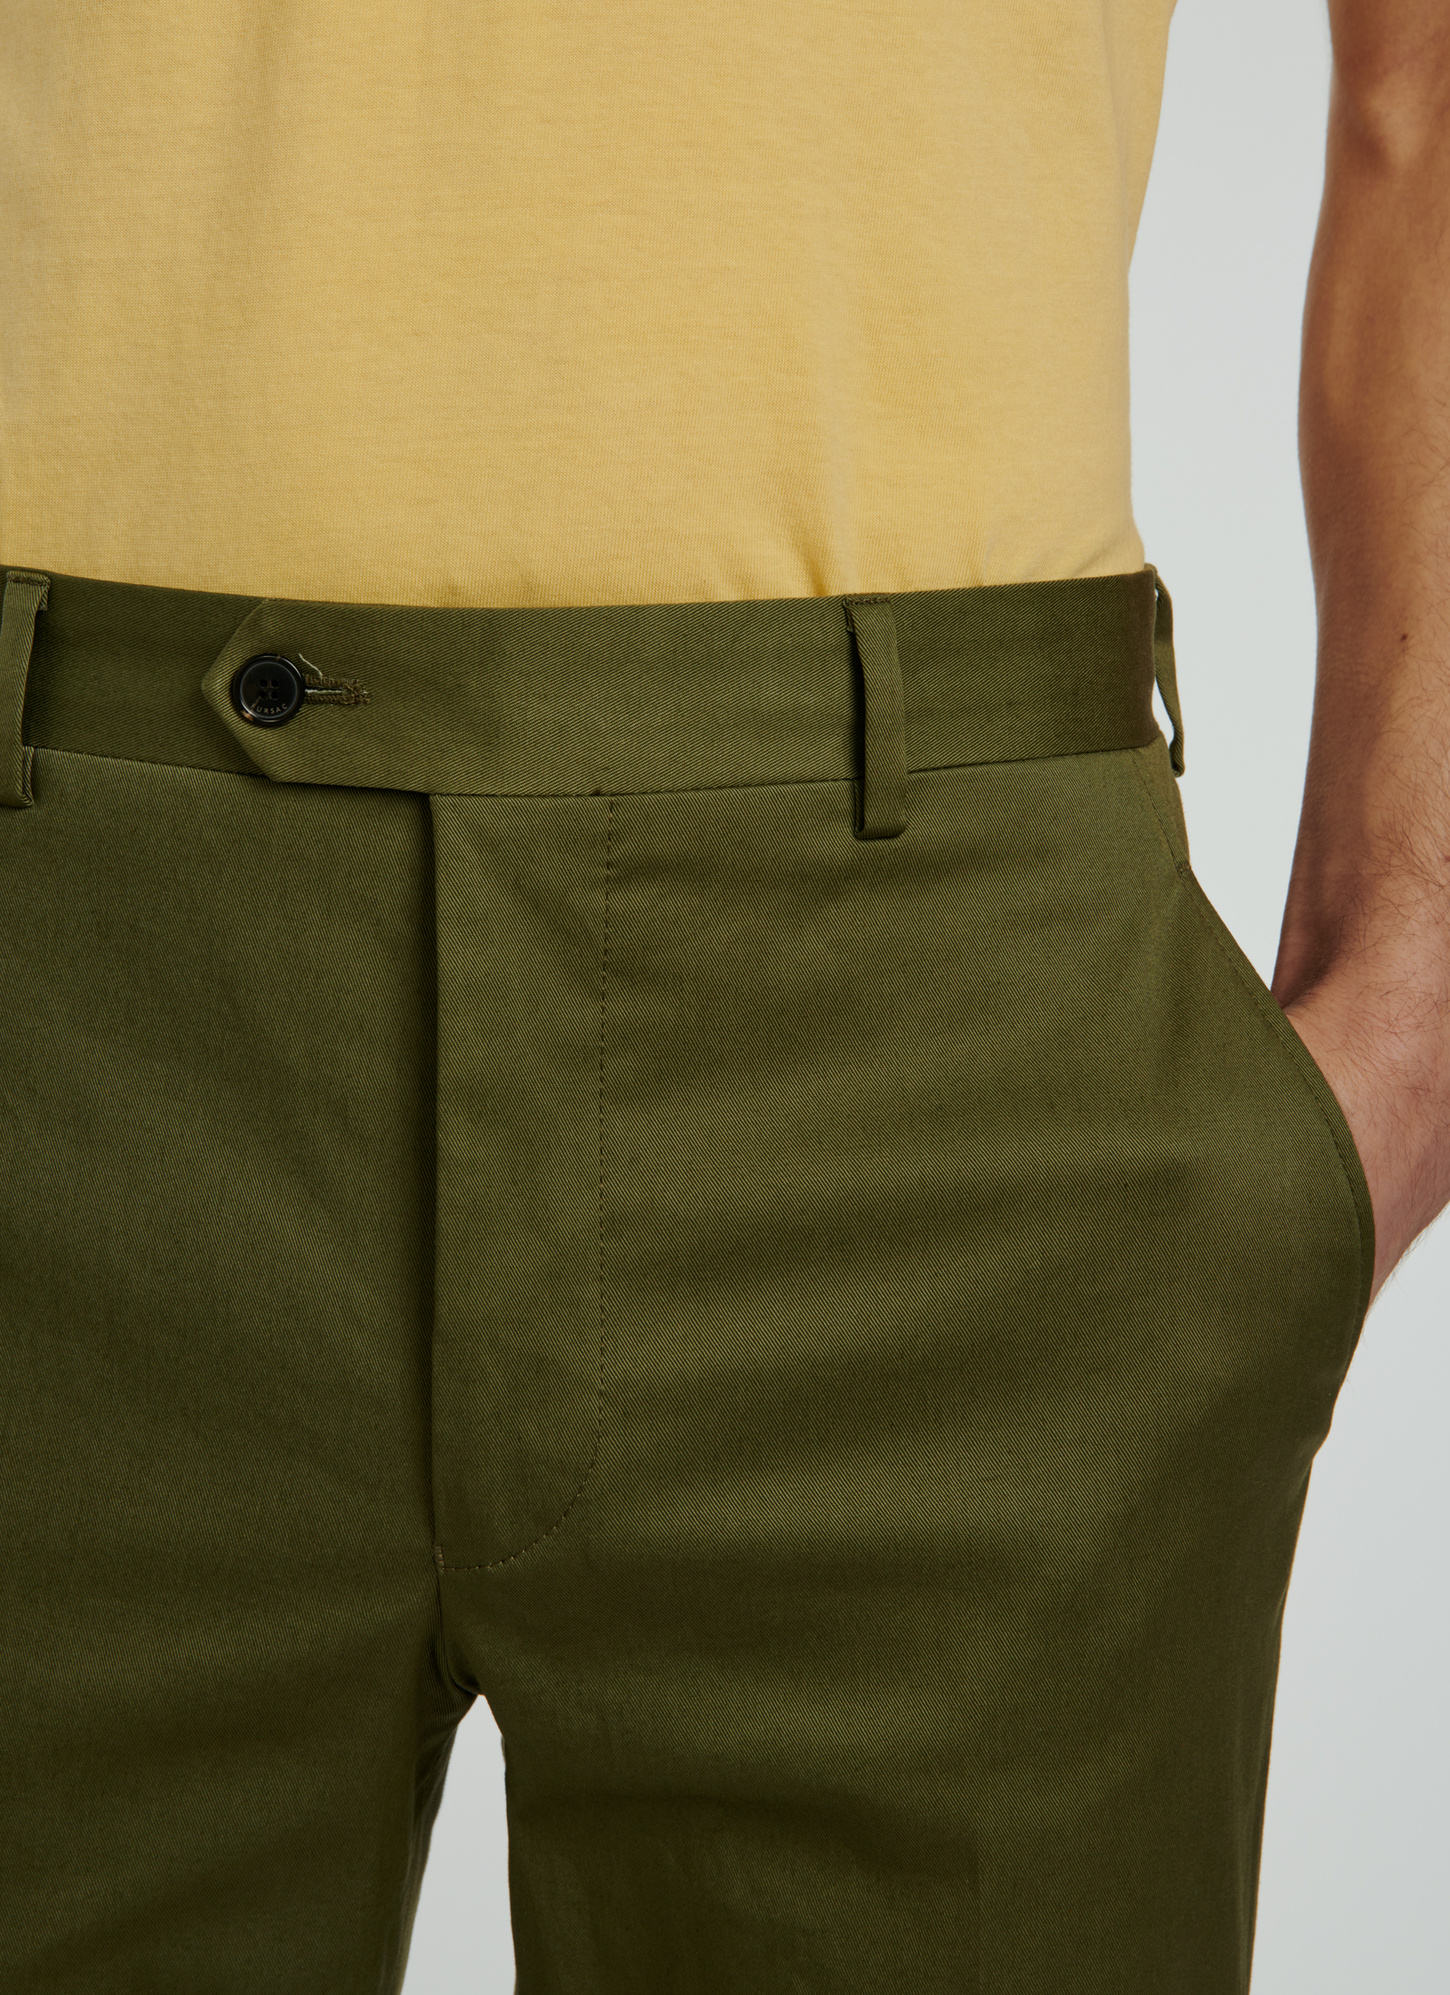 Olive green chino trousers 22EP3VKIA-VP14/40 - Men's chino trousers